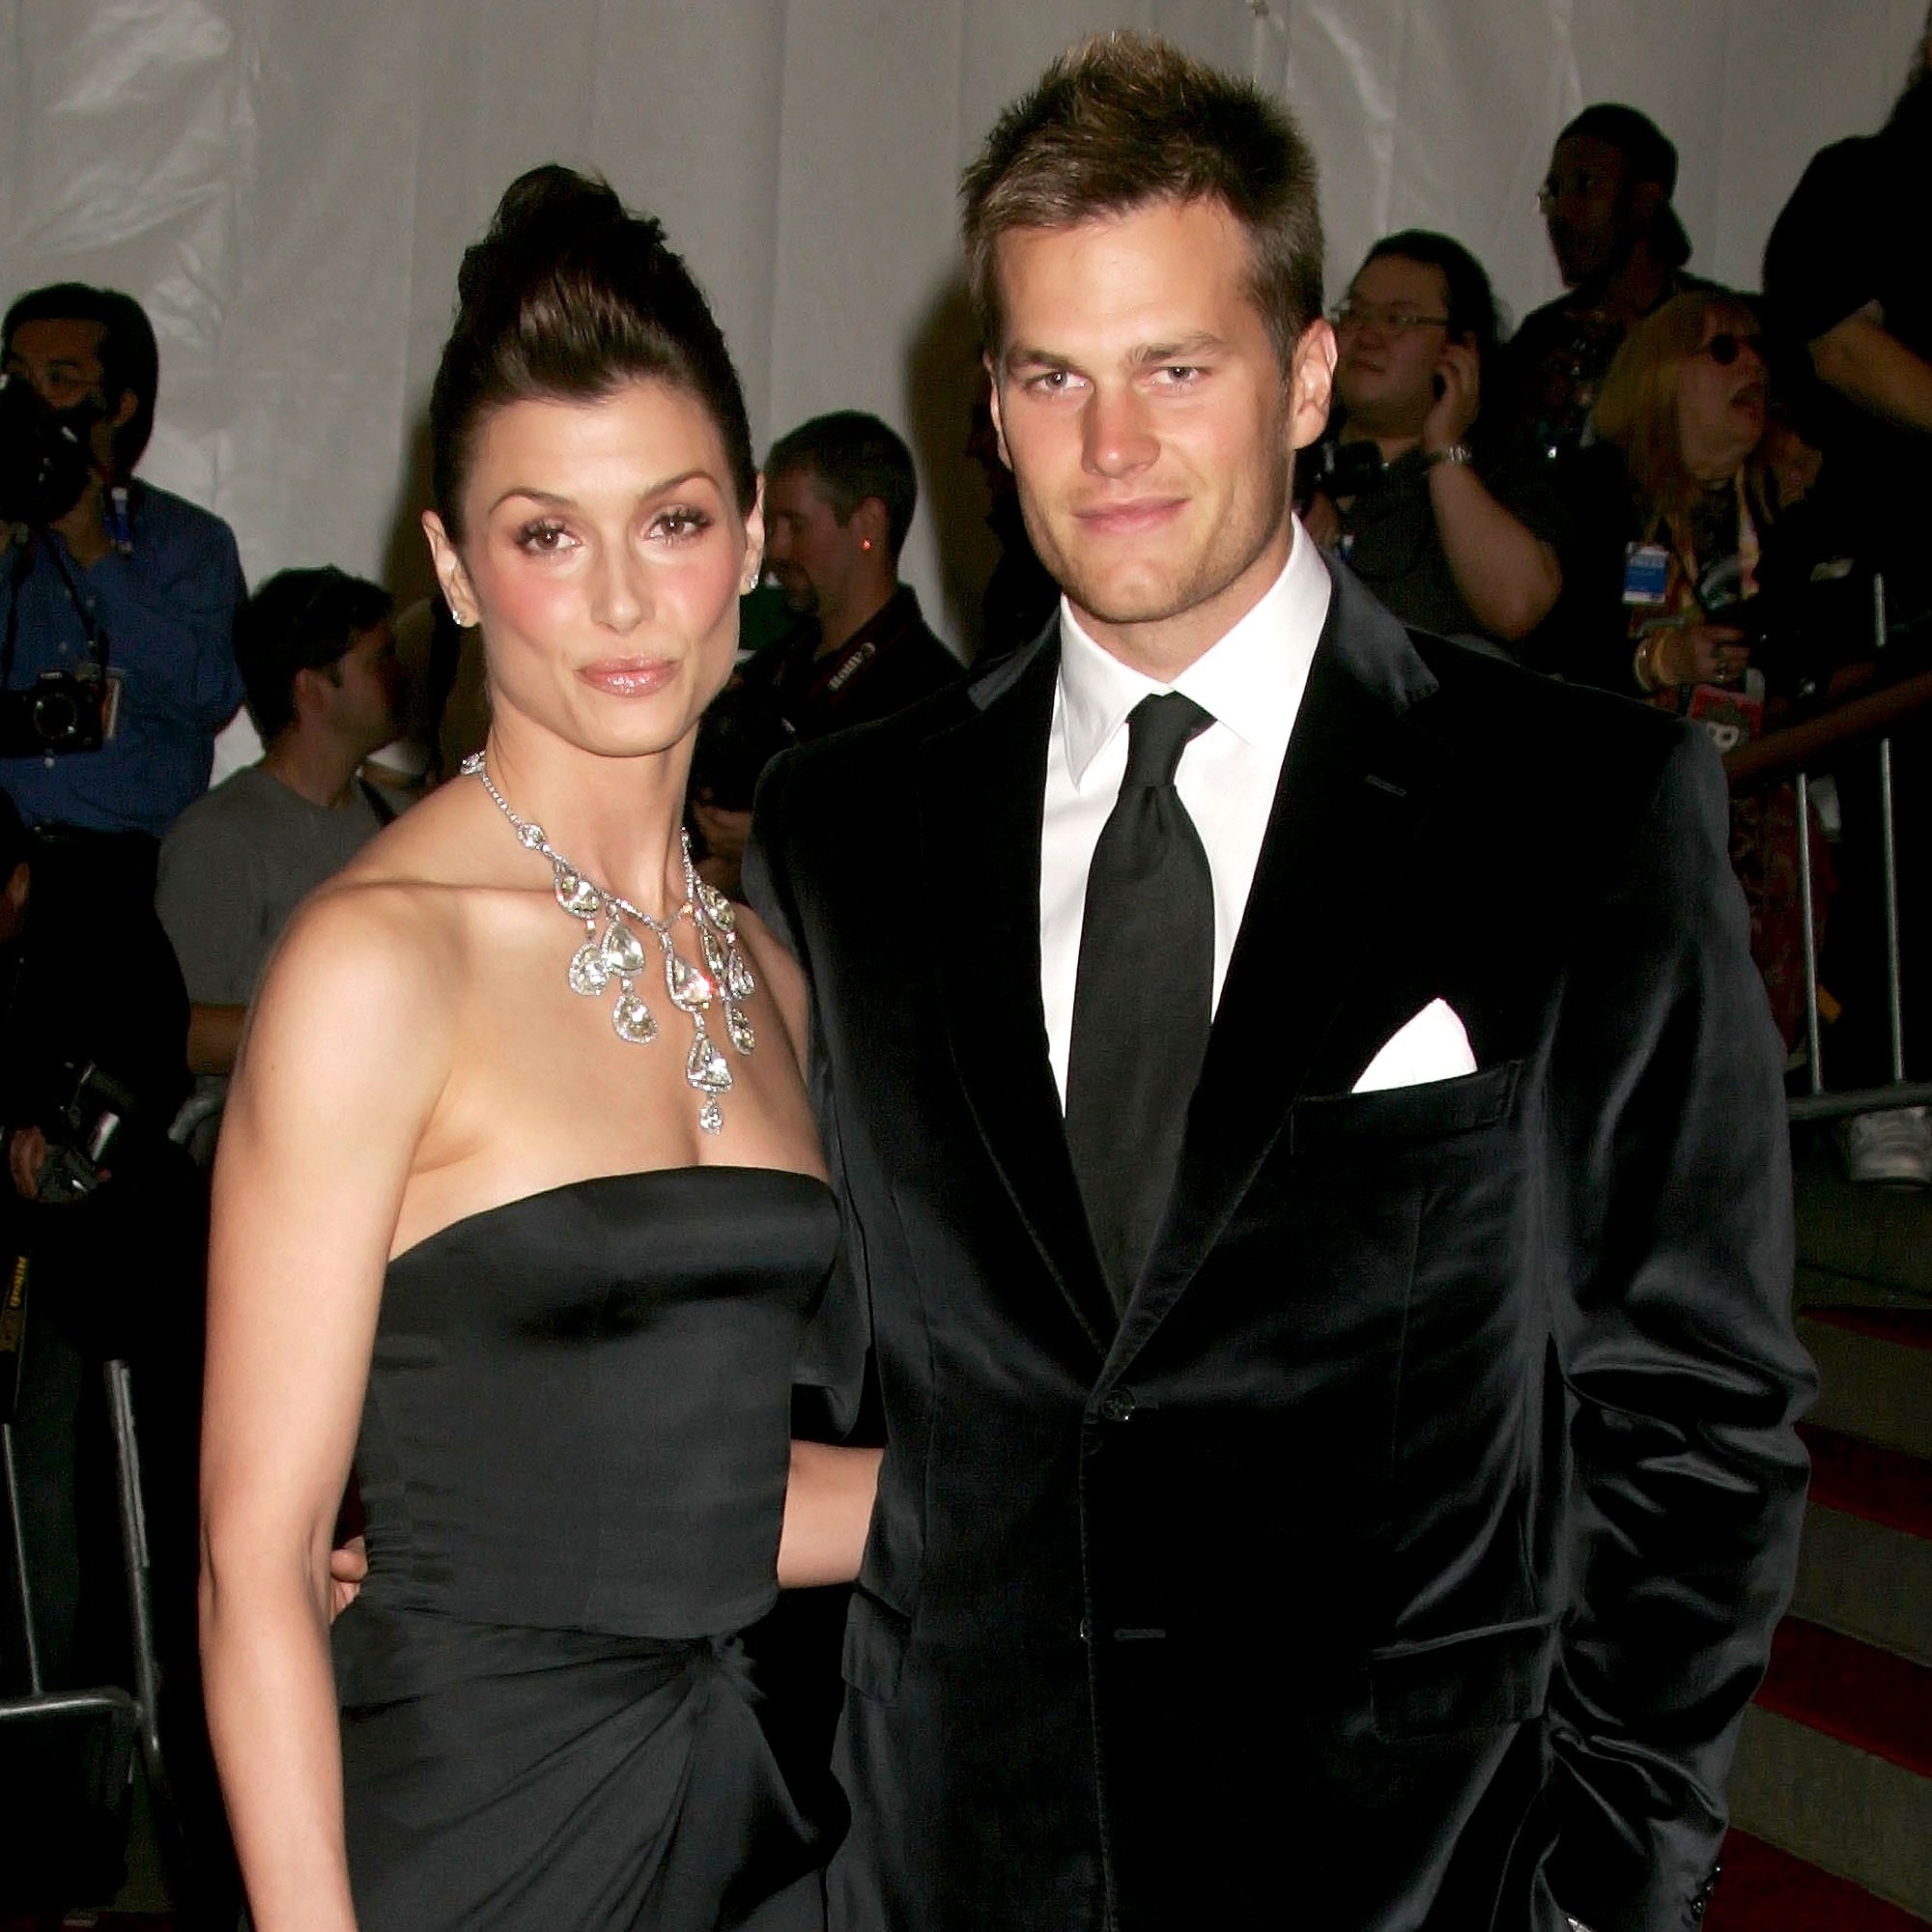 Bridget Moynahans Quotes About Her Relationship With Ex Tom Brady 5005